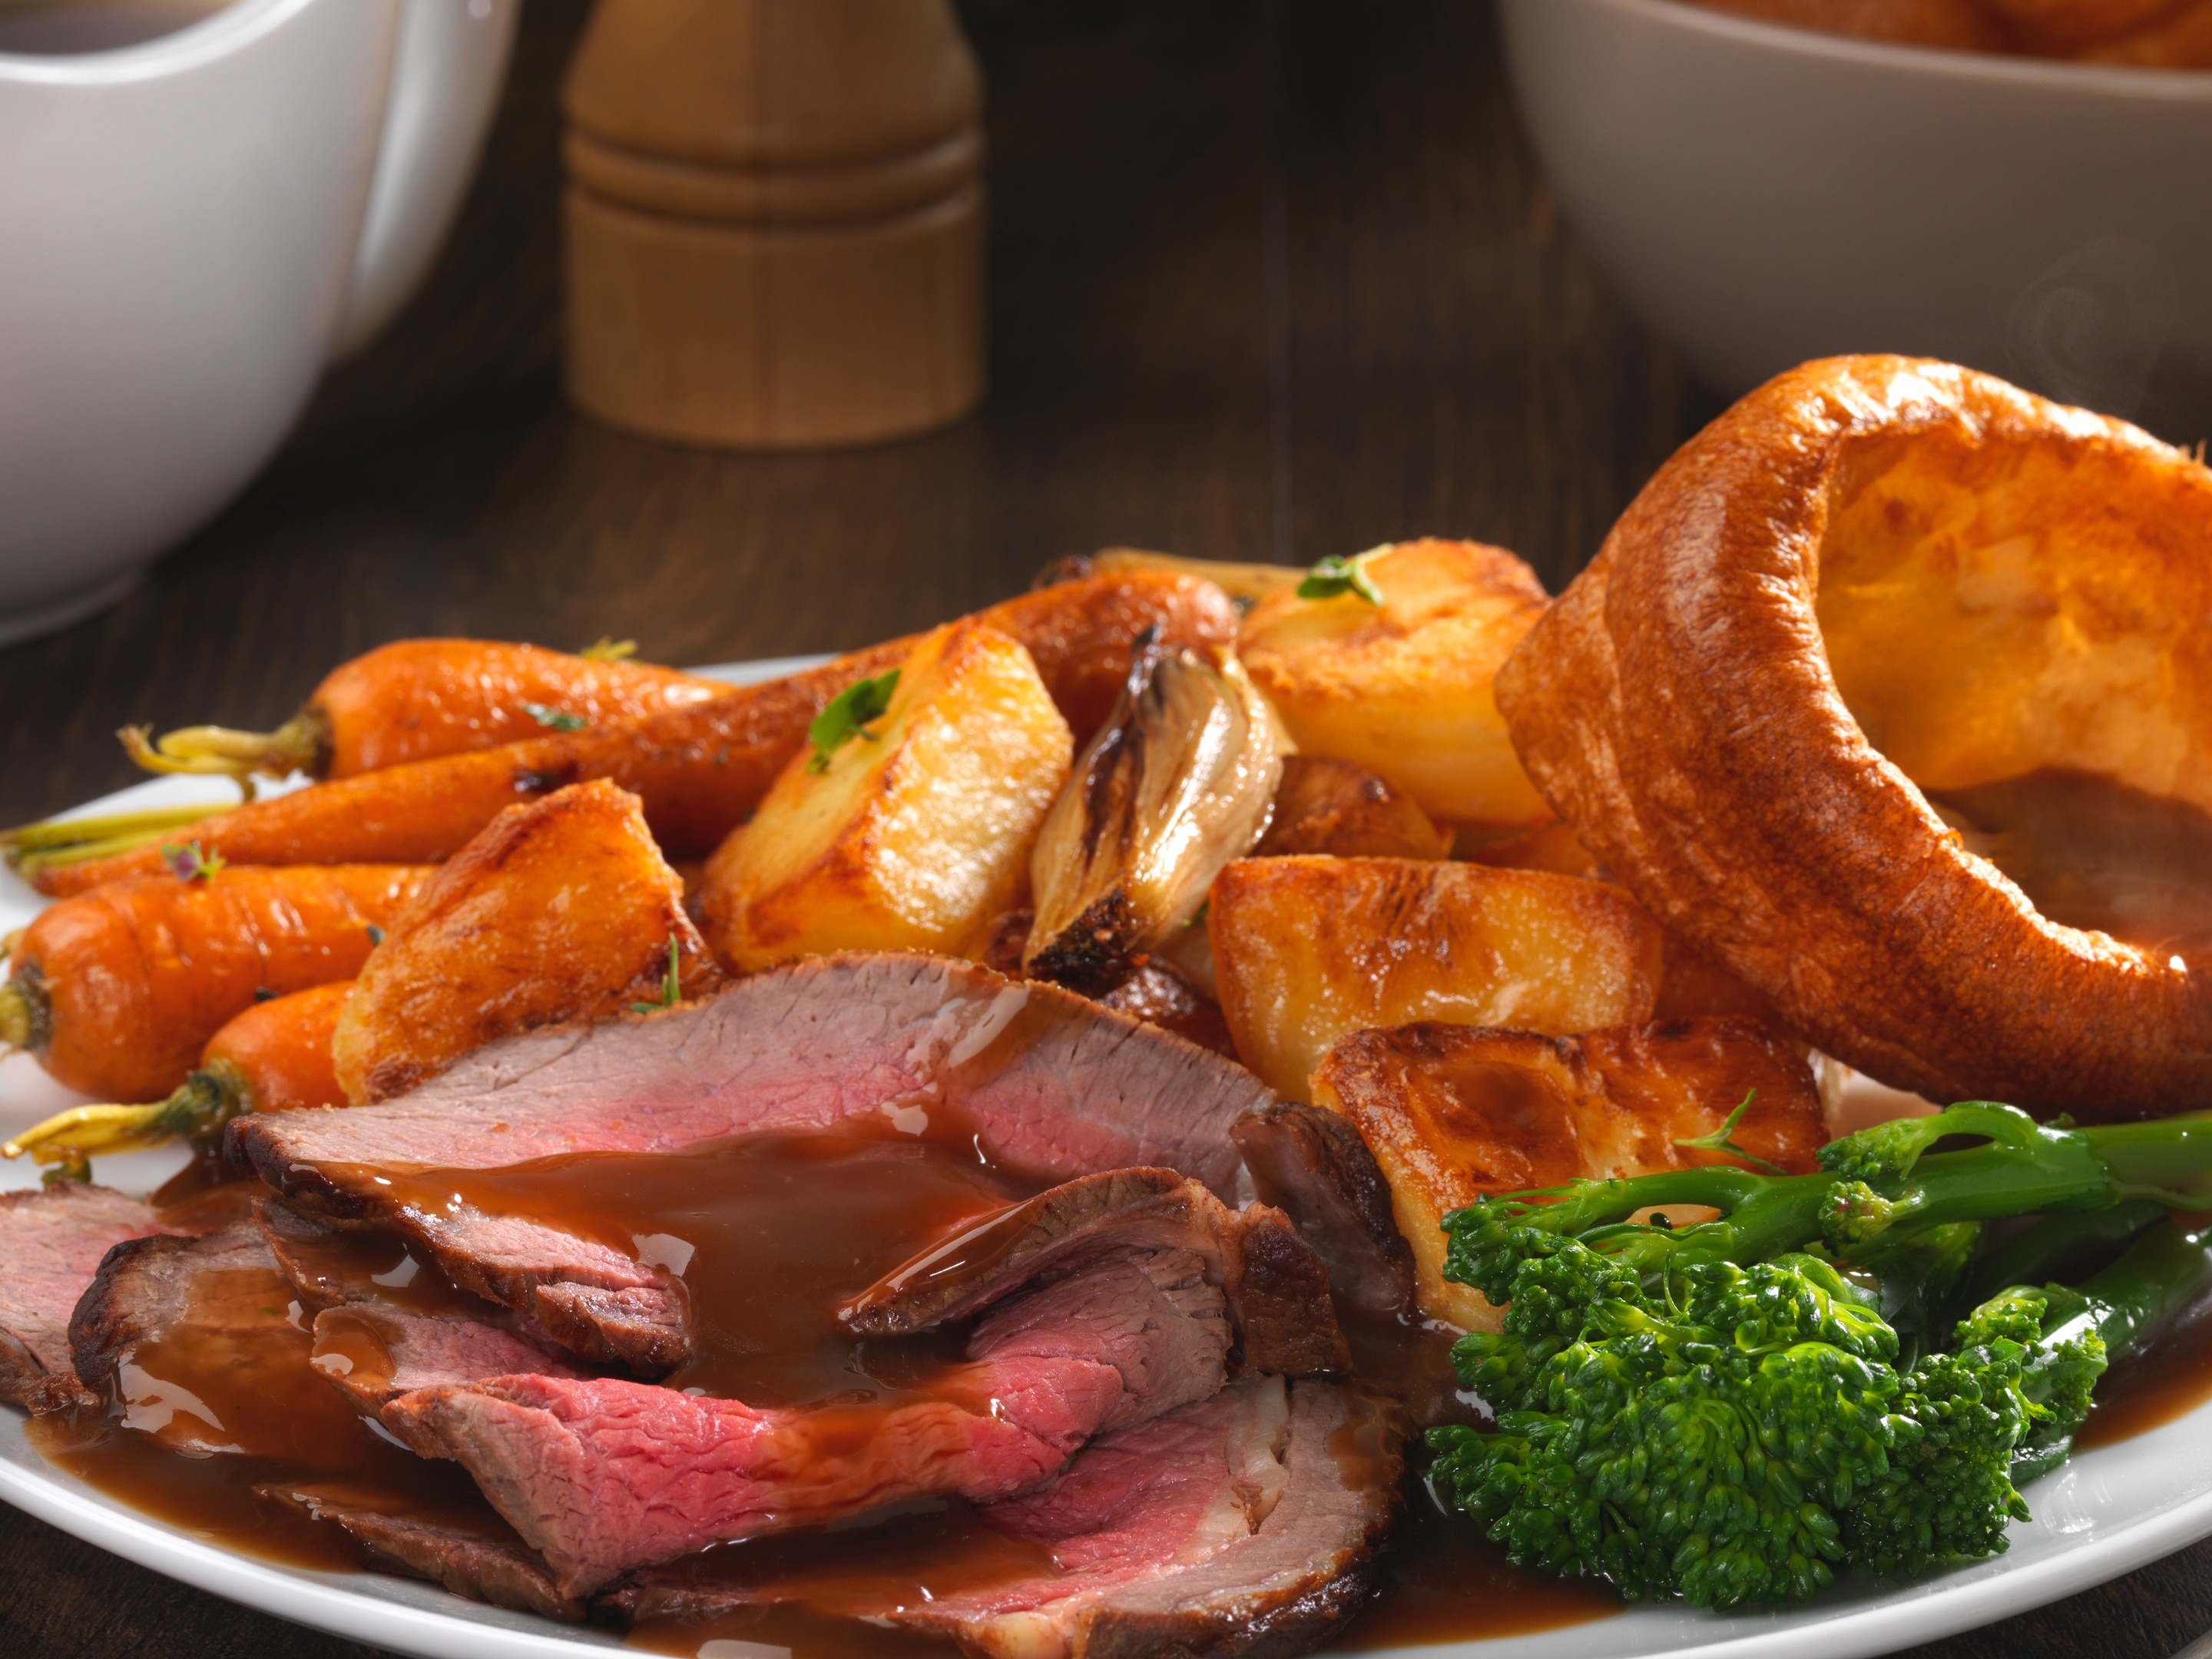 Roast beef with yorkshire pudding